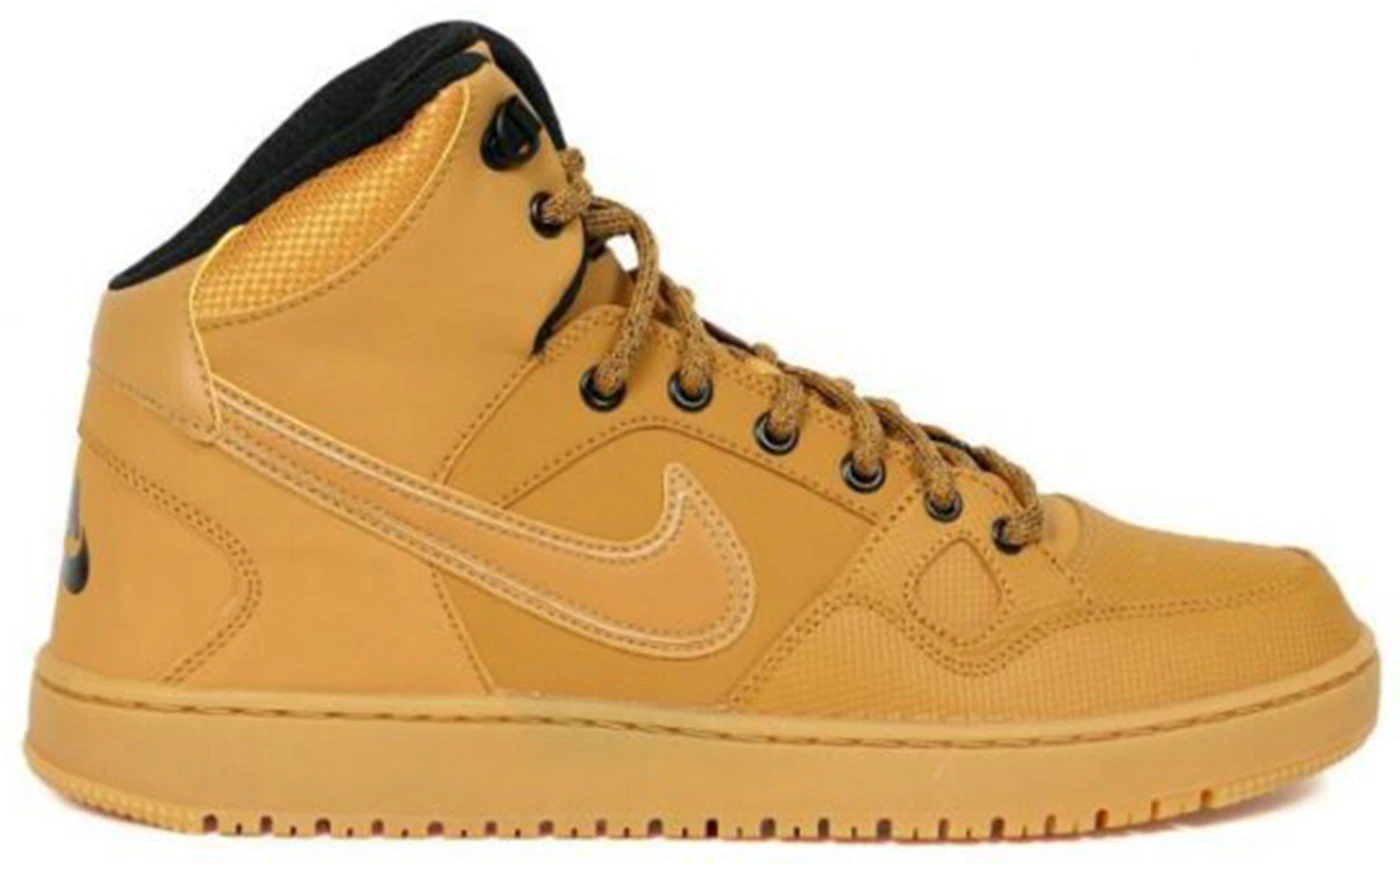 Nike of Force Mid Winter Wheat (GS) - 807392-700 -